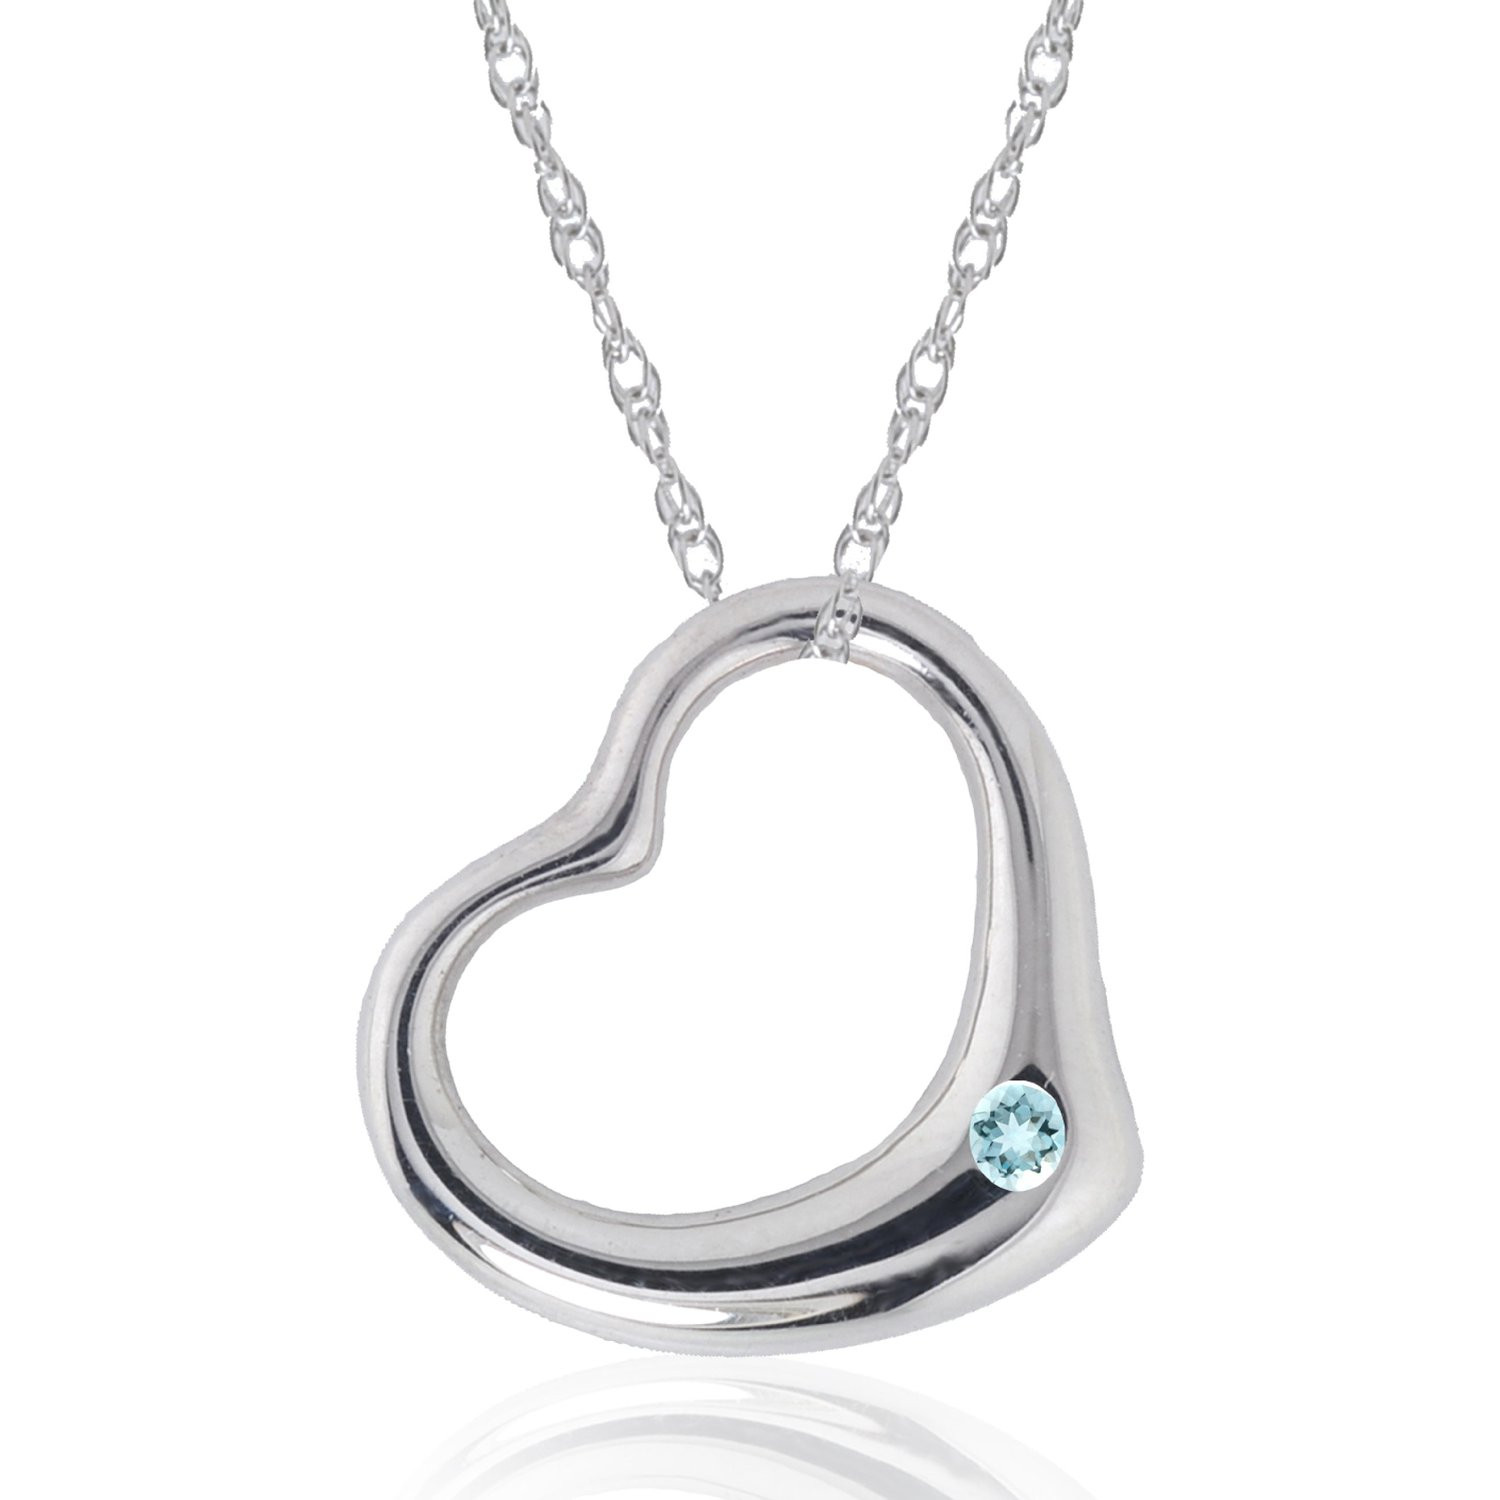 Open Heart Necklace Meaning
 Open Heart Necklaces